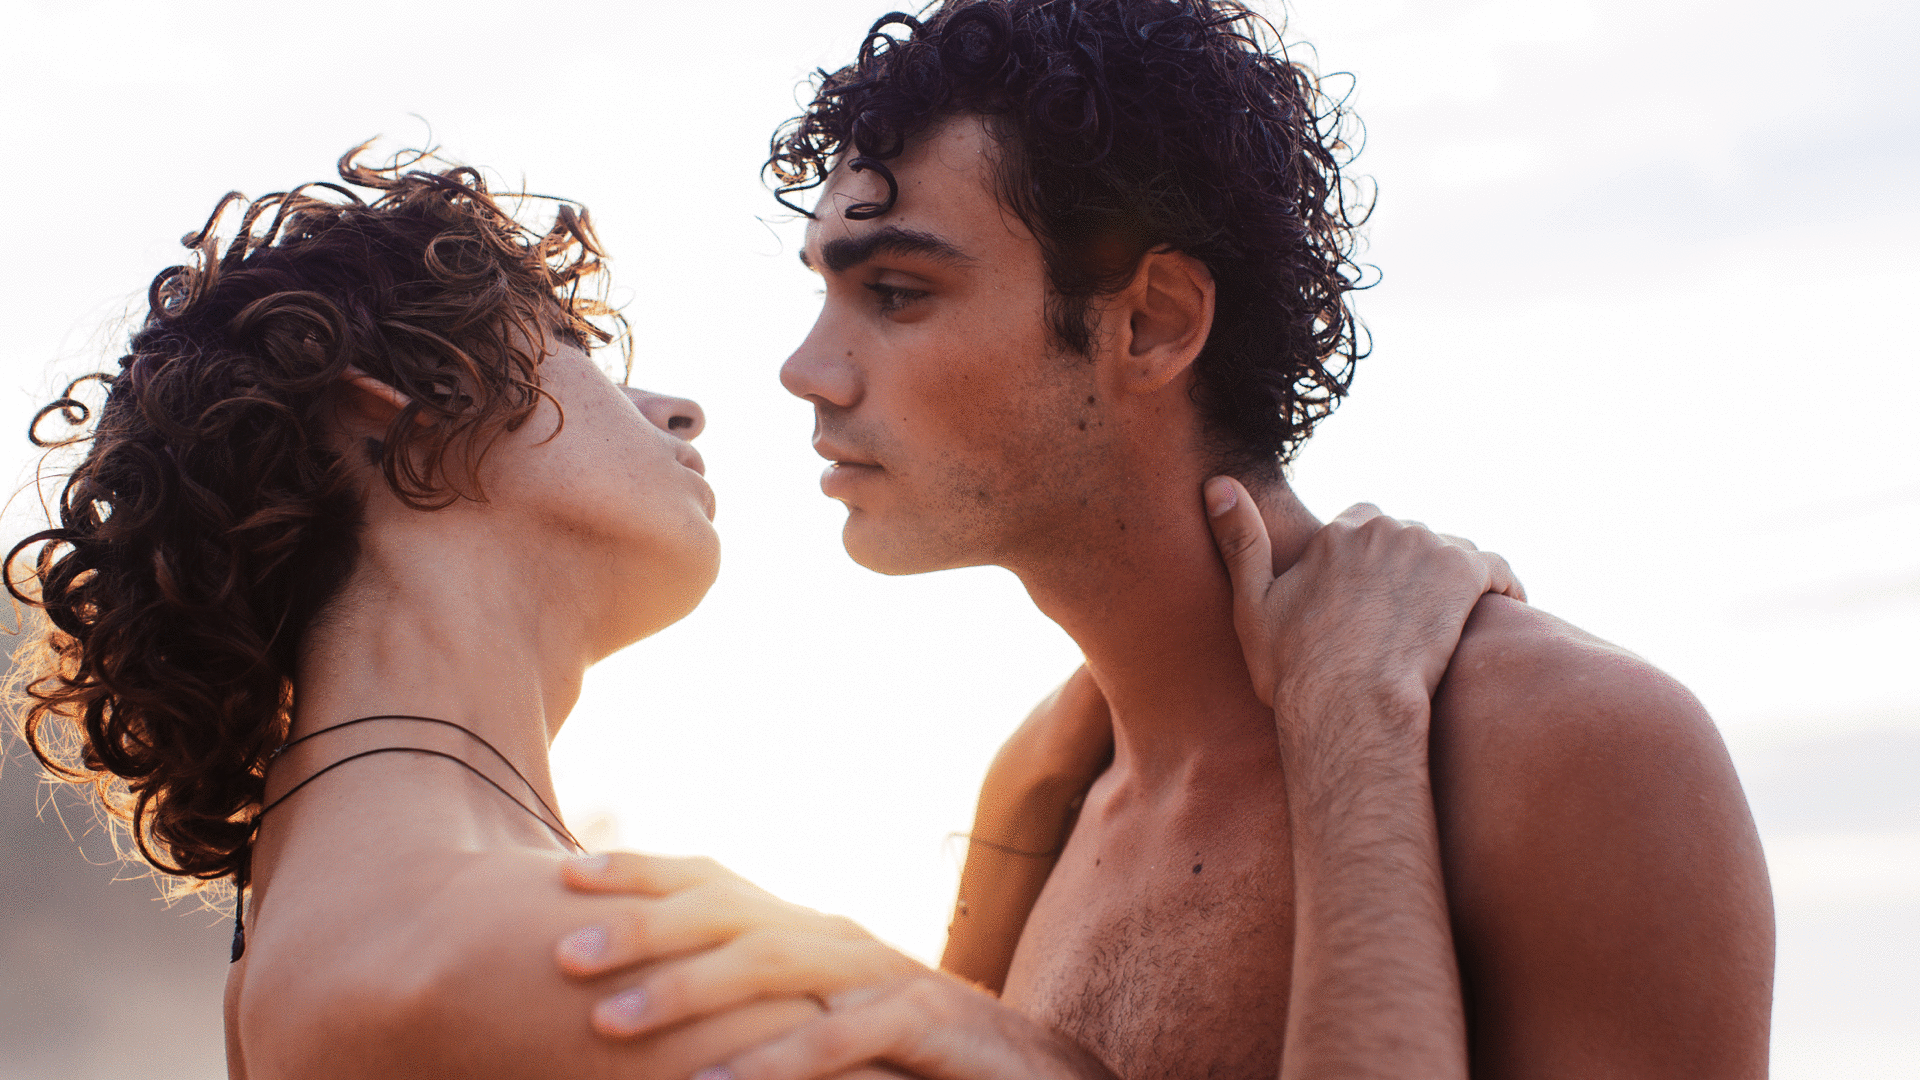 Gif of a homosexual couple smiling and kissing at sunset on the beach.